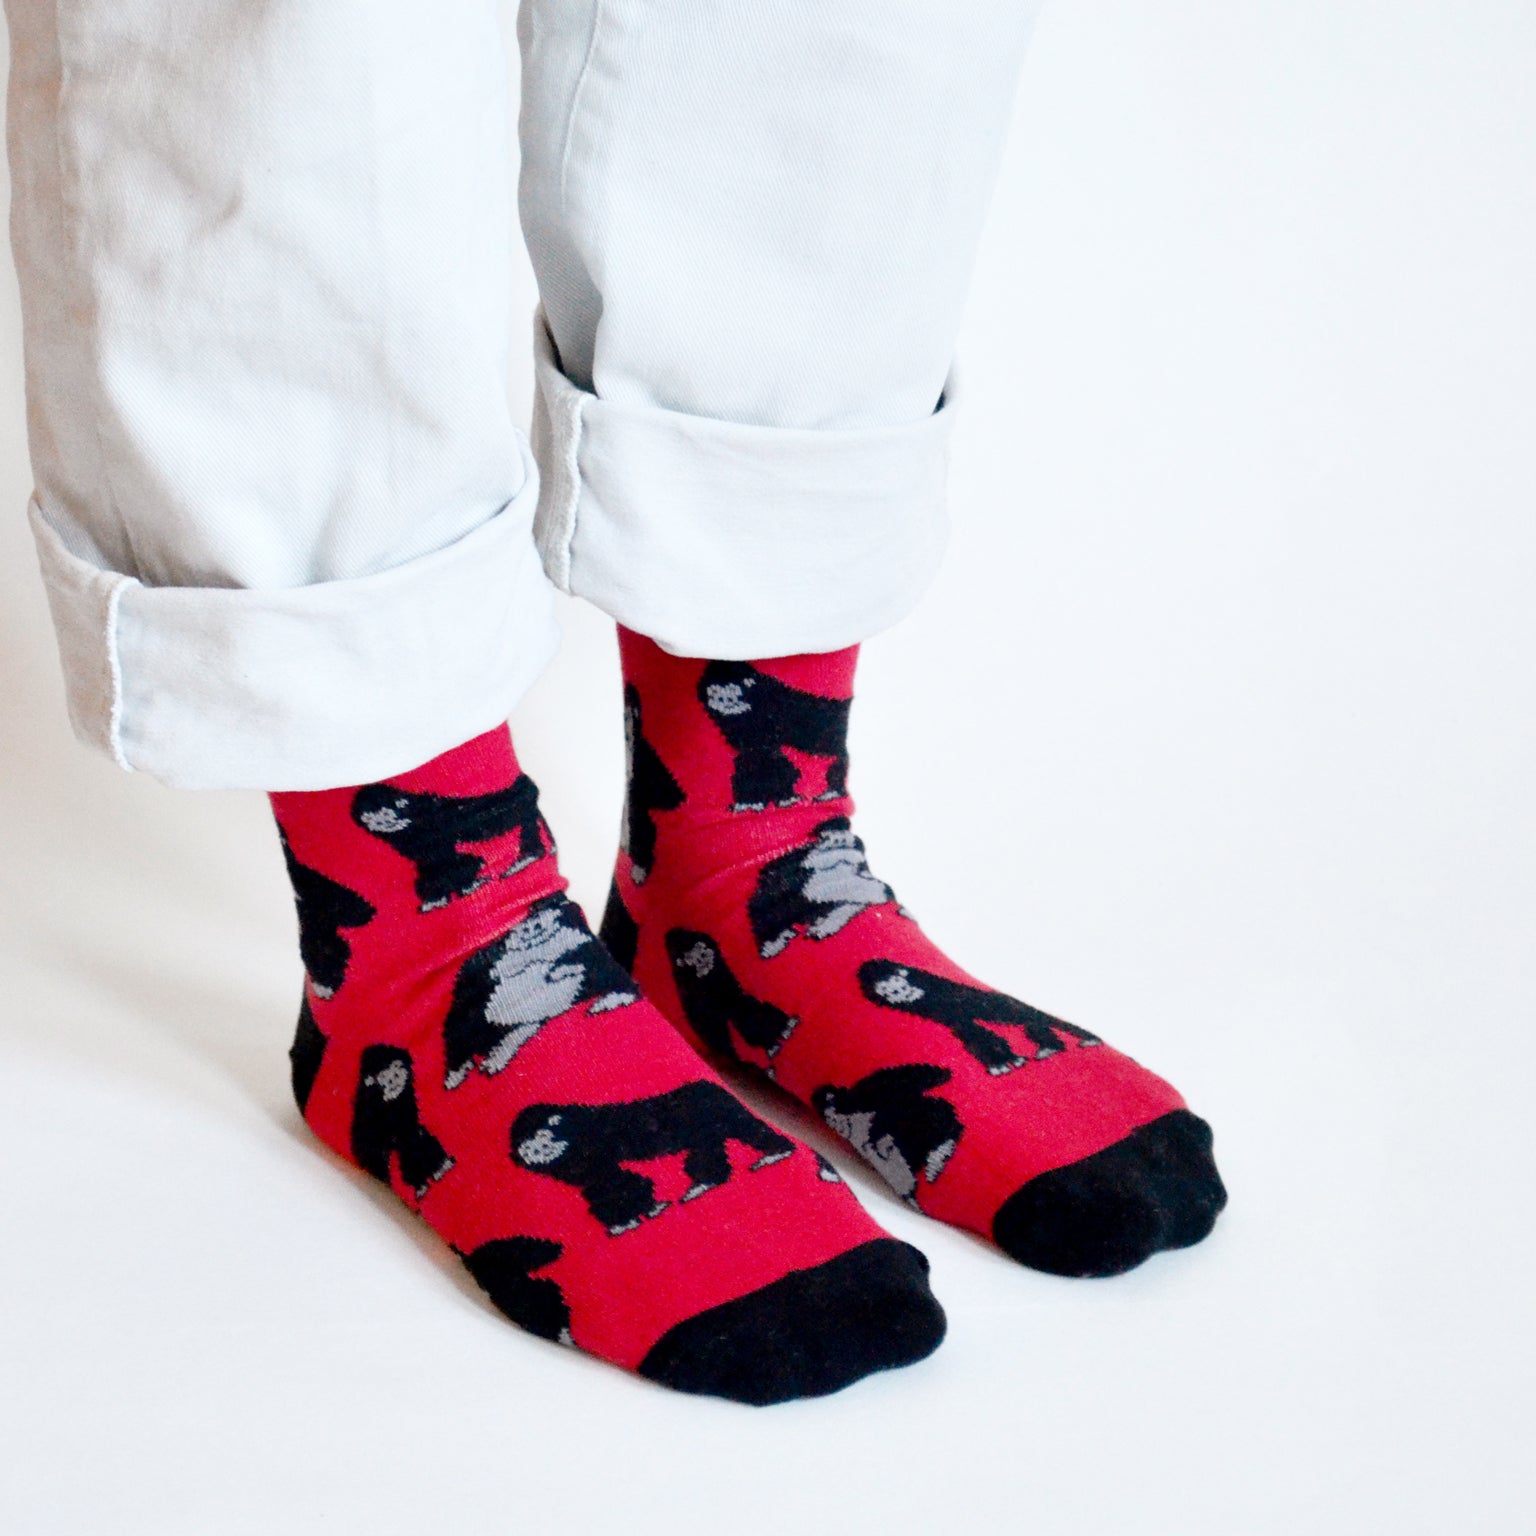 Standing model, side angle view, wearing red and black gorilla socks